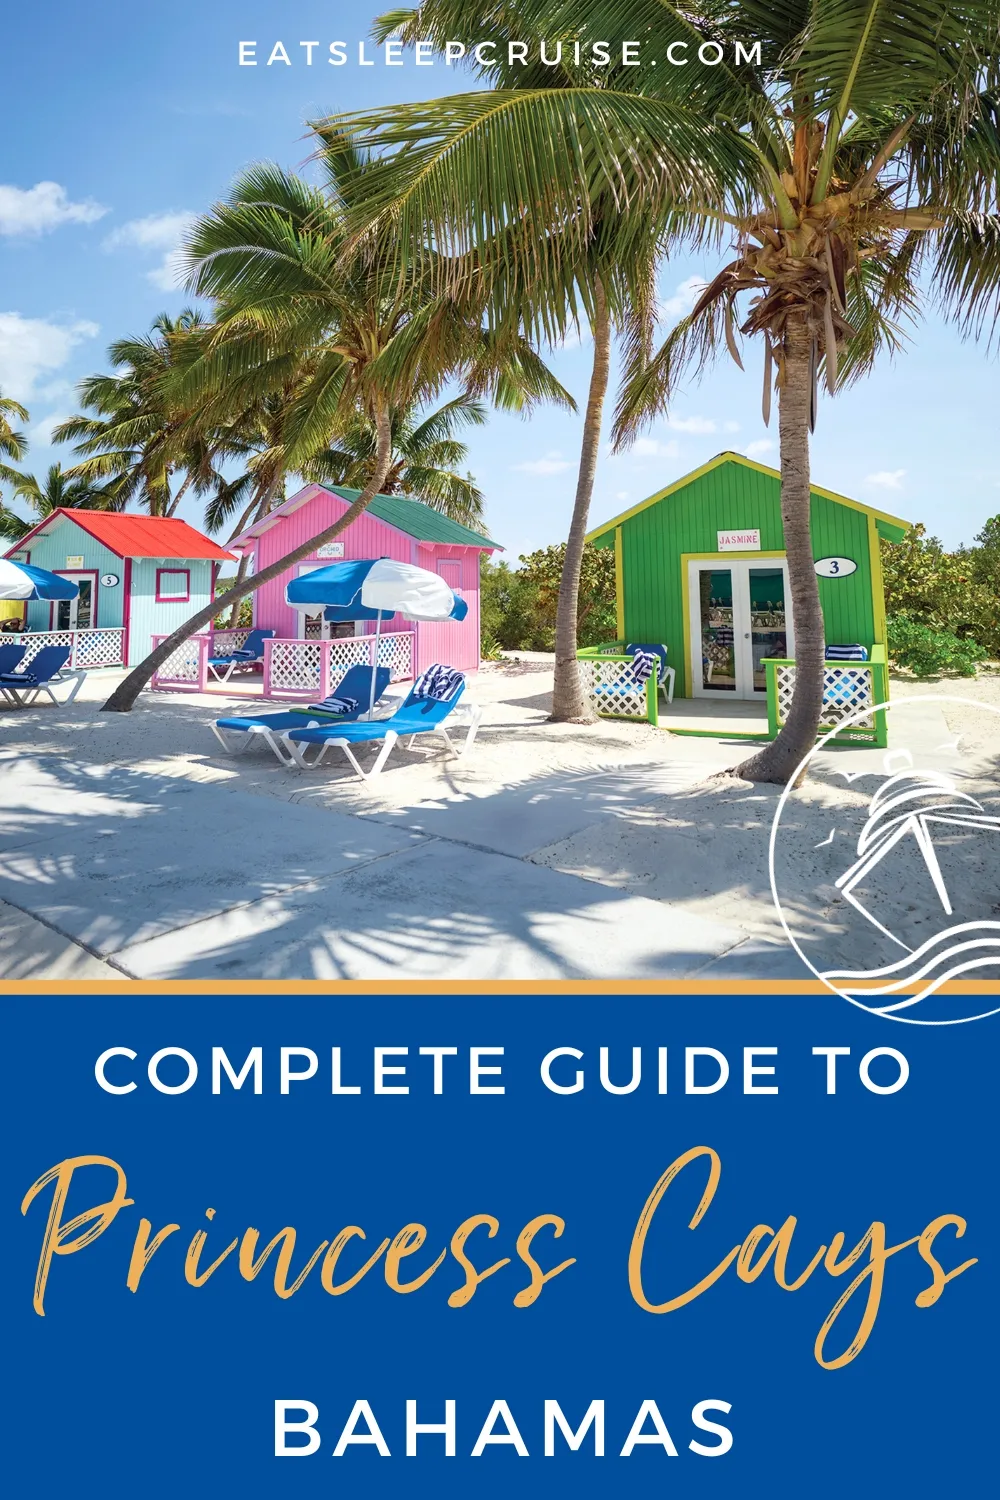 Everything You Need to Know About Princess Cays